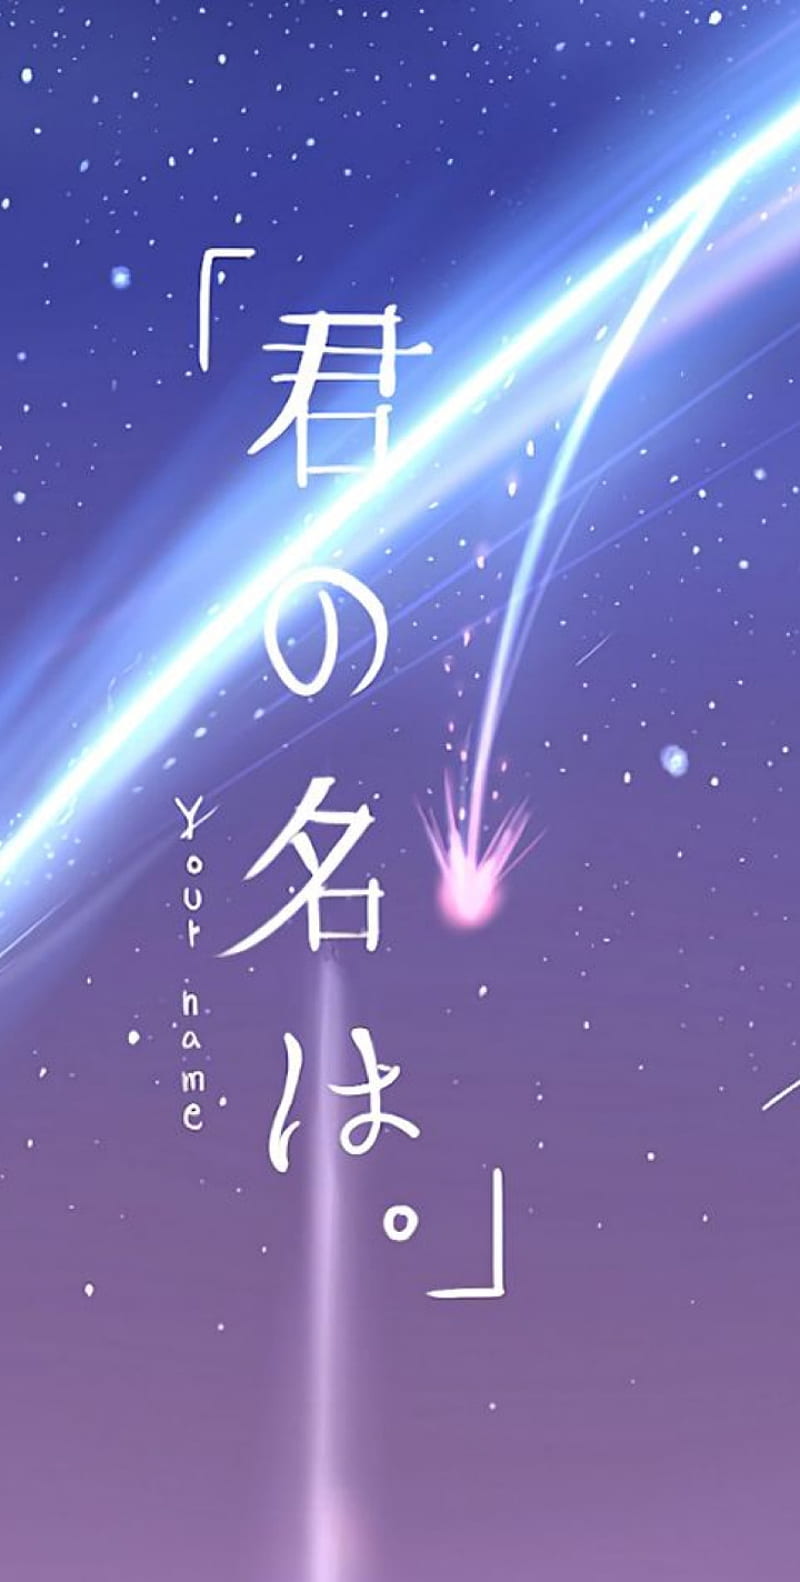 Your Name Galaxy Supreme Hd Phone Wallpaper Peakpx